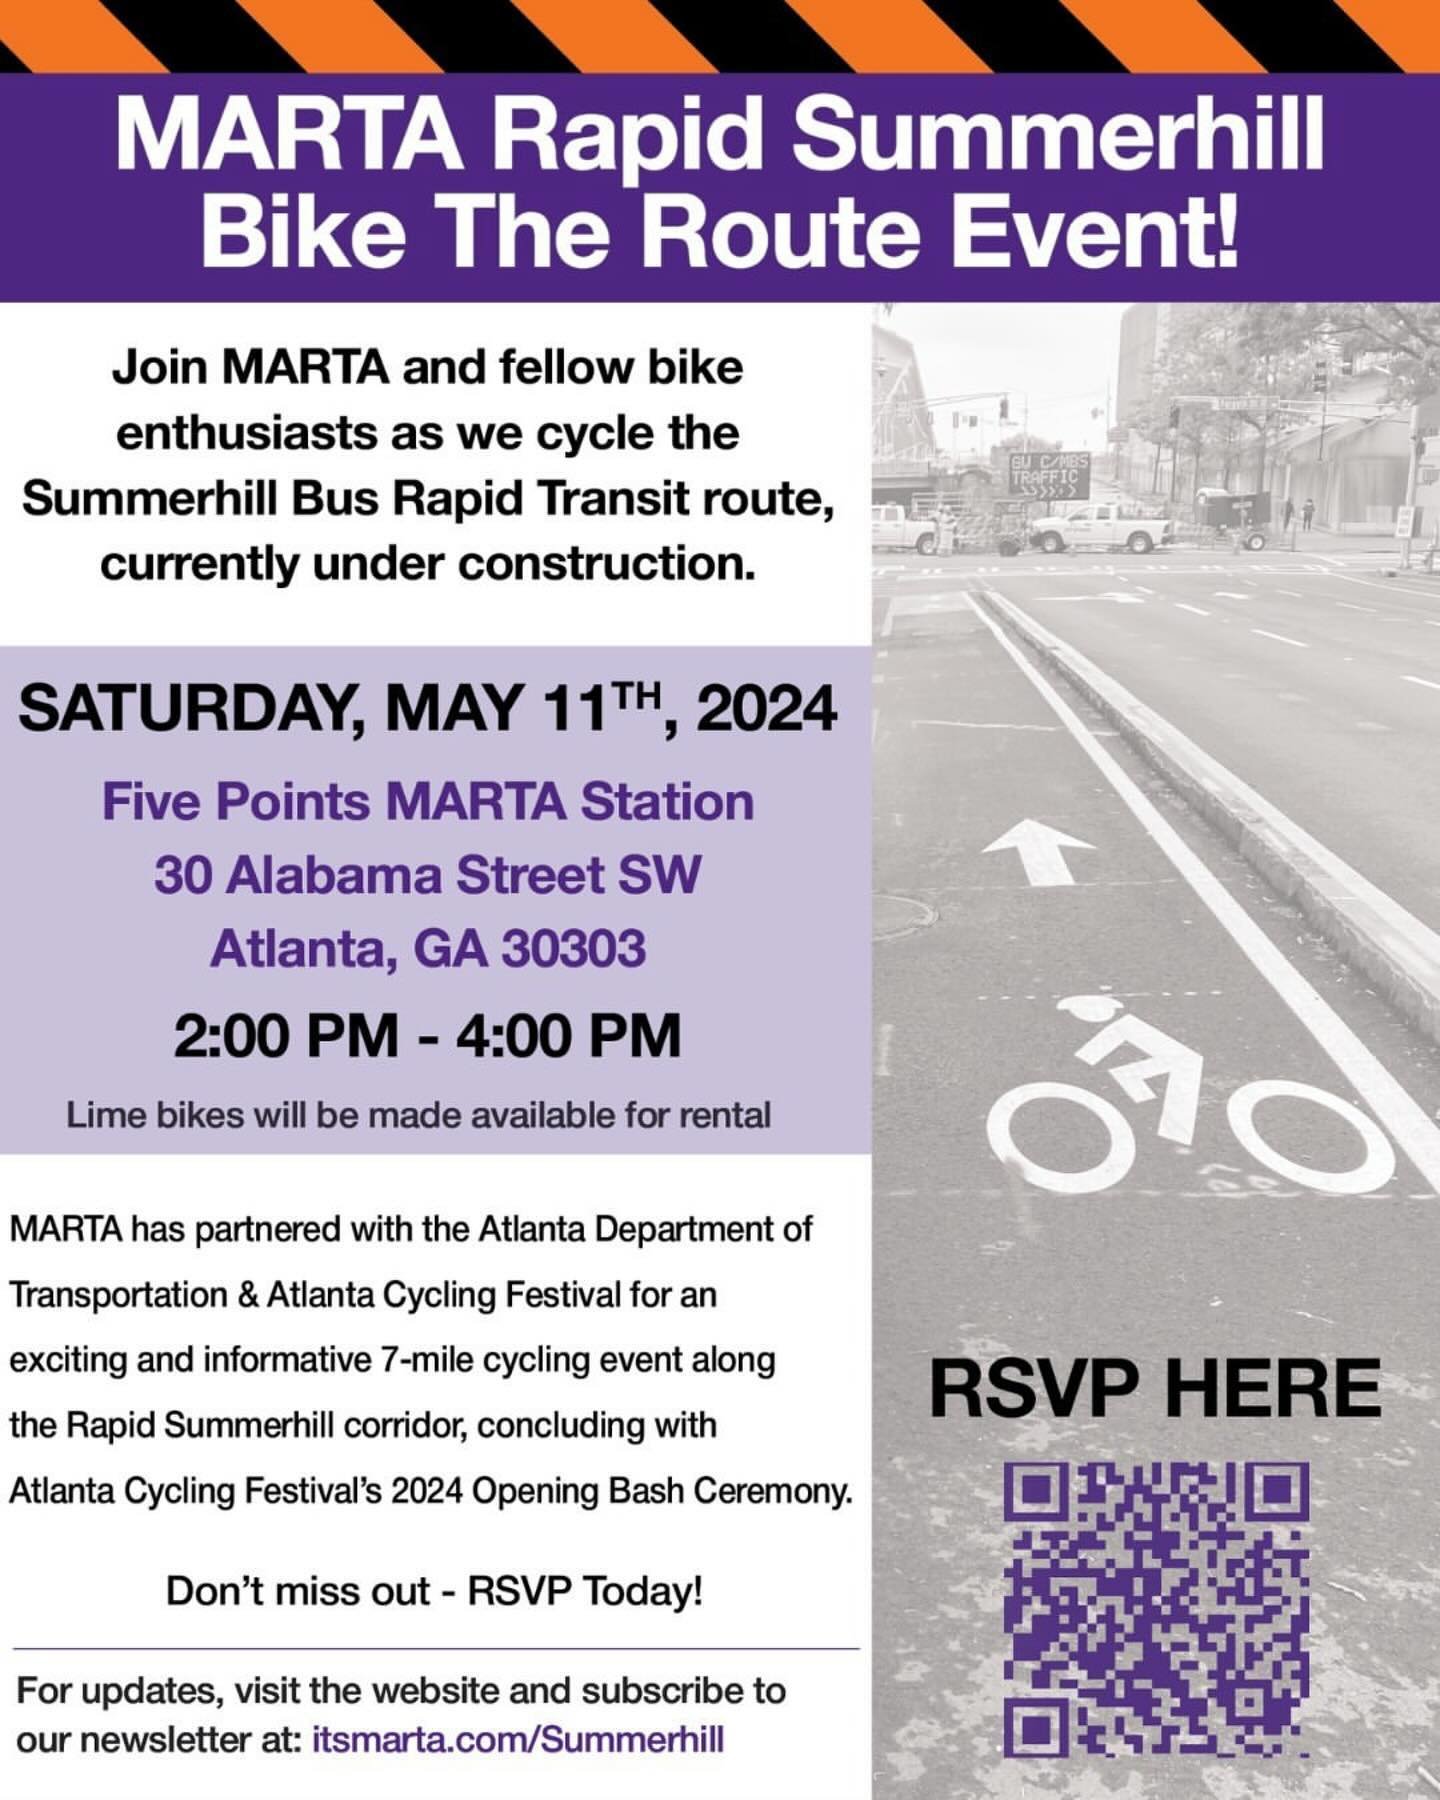 #repost @summerhill_atl
・・・
Get ready to pedal through Summerhill with @MARTAtransit &lsquo;s Bike The Route event! 🌇⁠
⁠
Join us on May 11th from 2 to 4 PM for a scenic ride along the Summerhill Bus Rapid Transit Route. Lime bikes will be available 